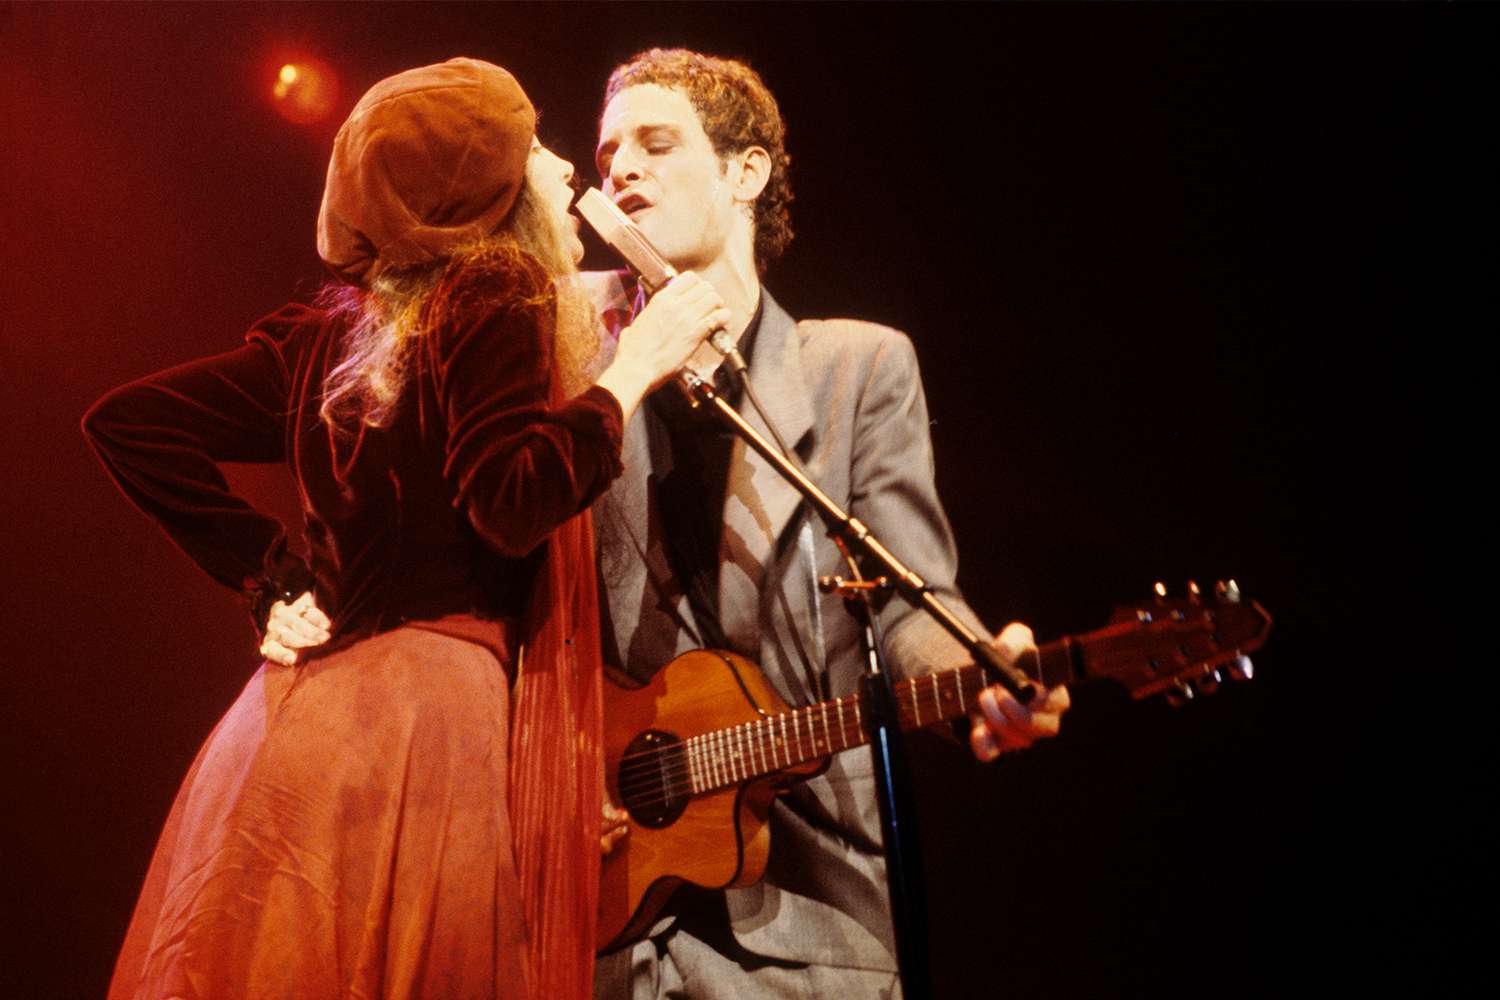 Photo of Lindsey BUCKINGHAM and Stevie NICKS and FLEETWOOD MAC; L-R. Stevie Nicks, Lindsey Buckingham performing live onstage